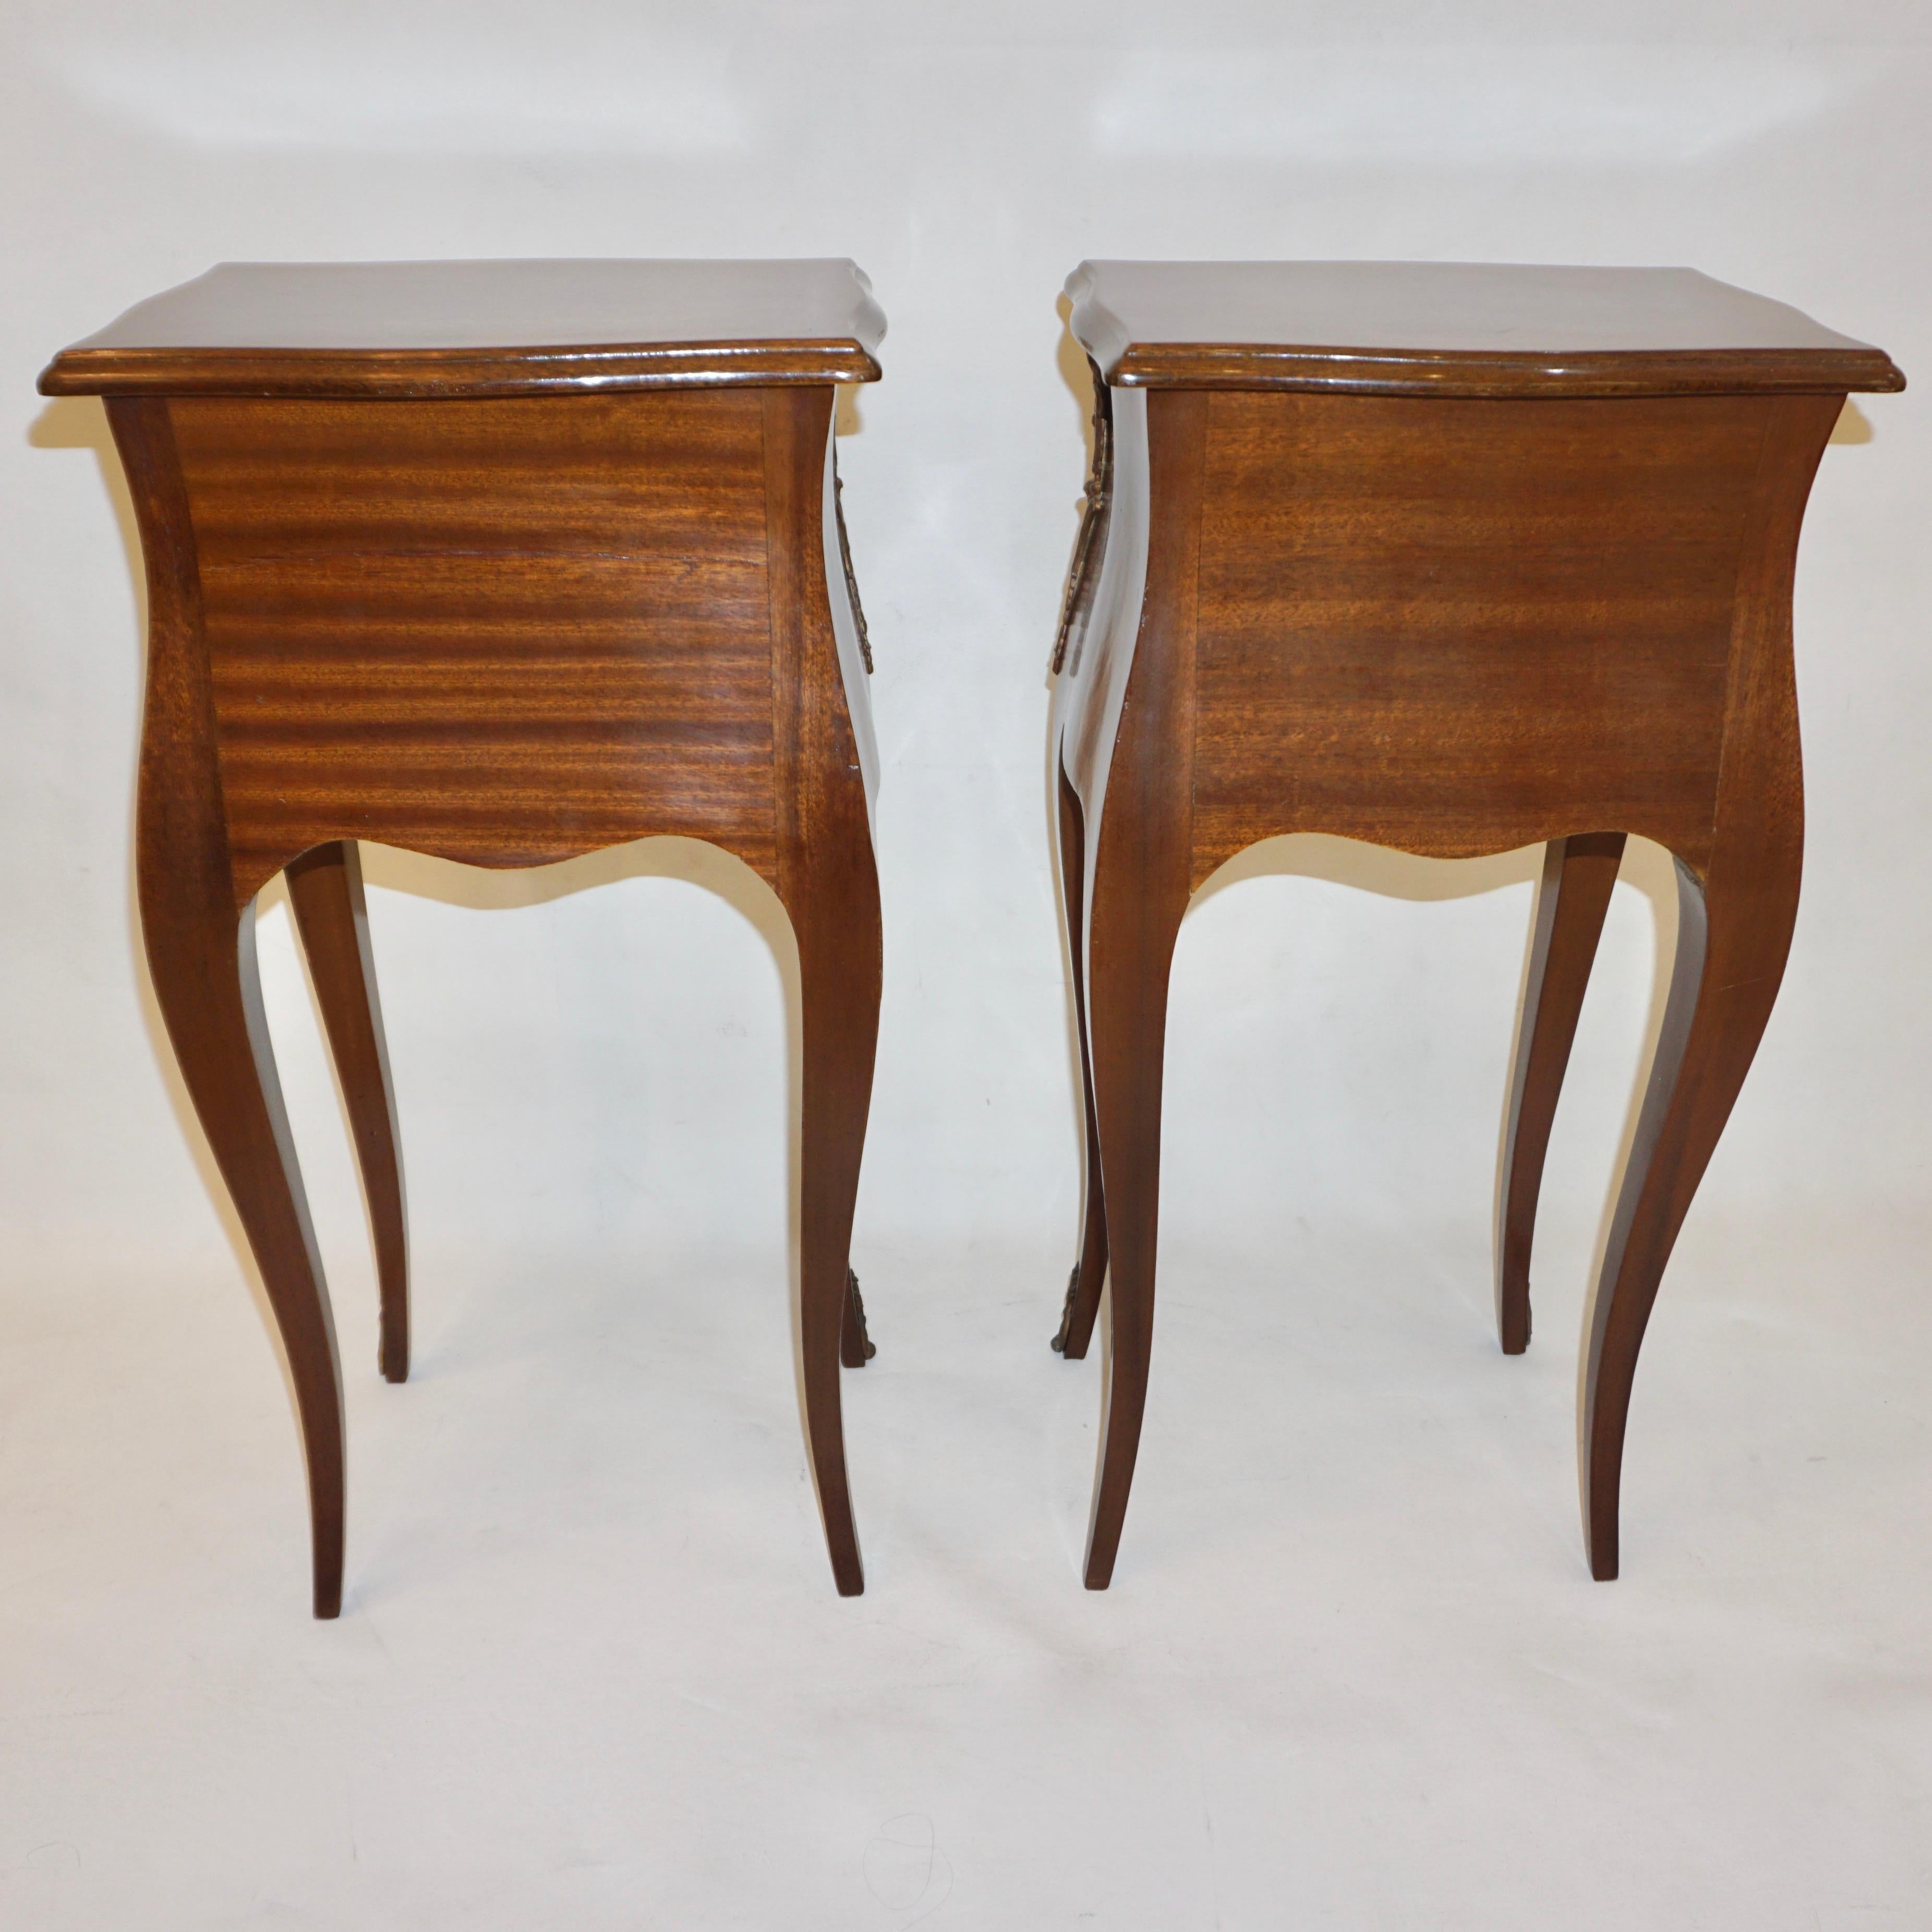 Bronze 1940 French Louis XV Revival Pair of Inlaid Rosewood Walnut 2-Drawer Side Tables